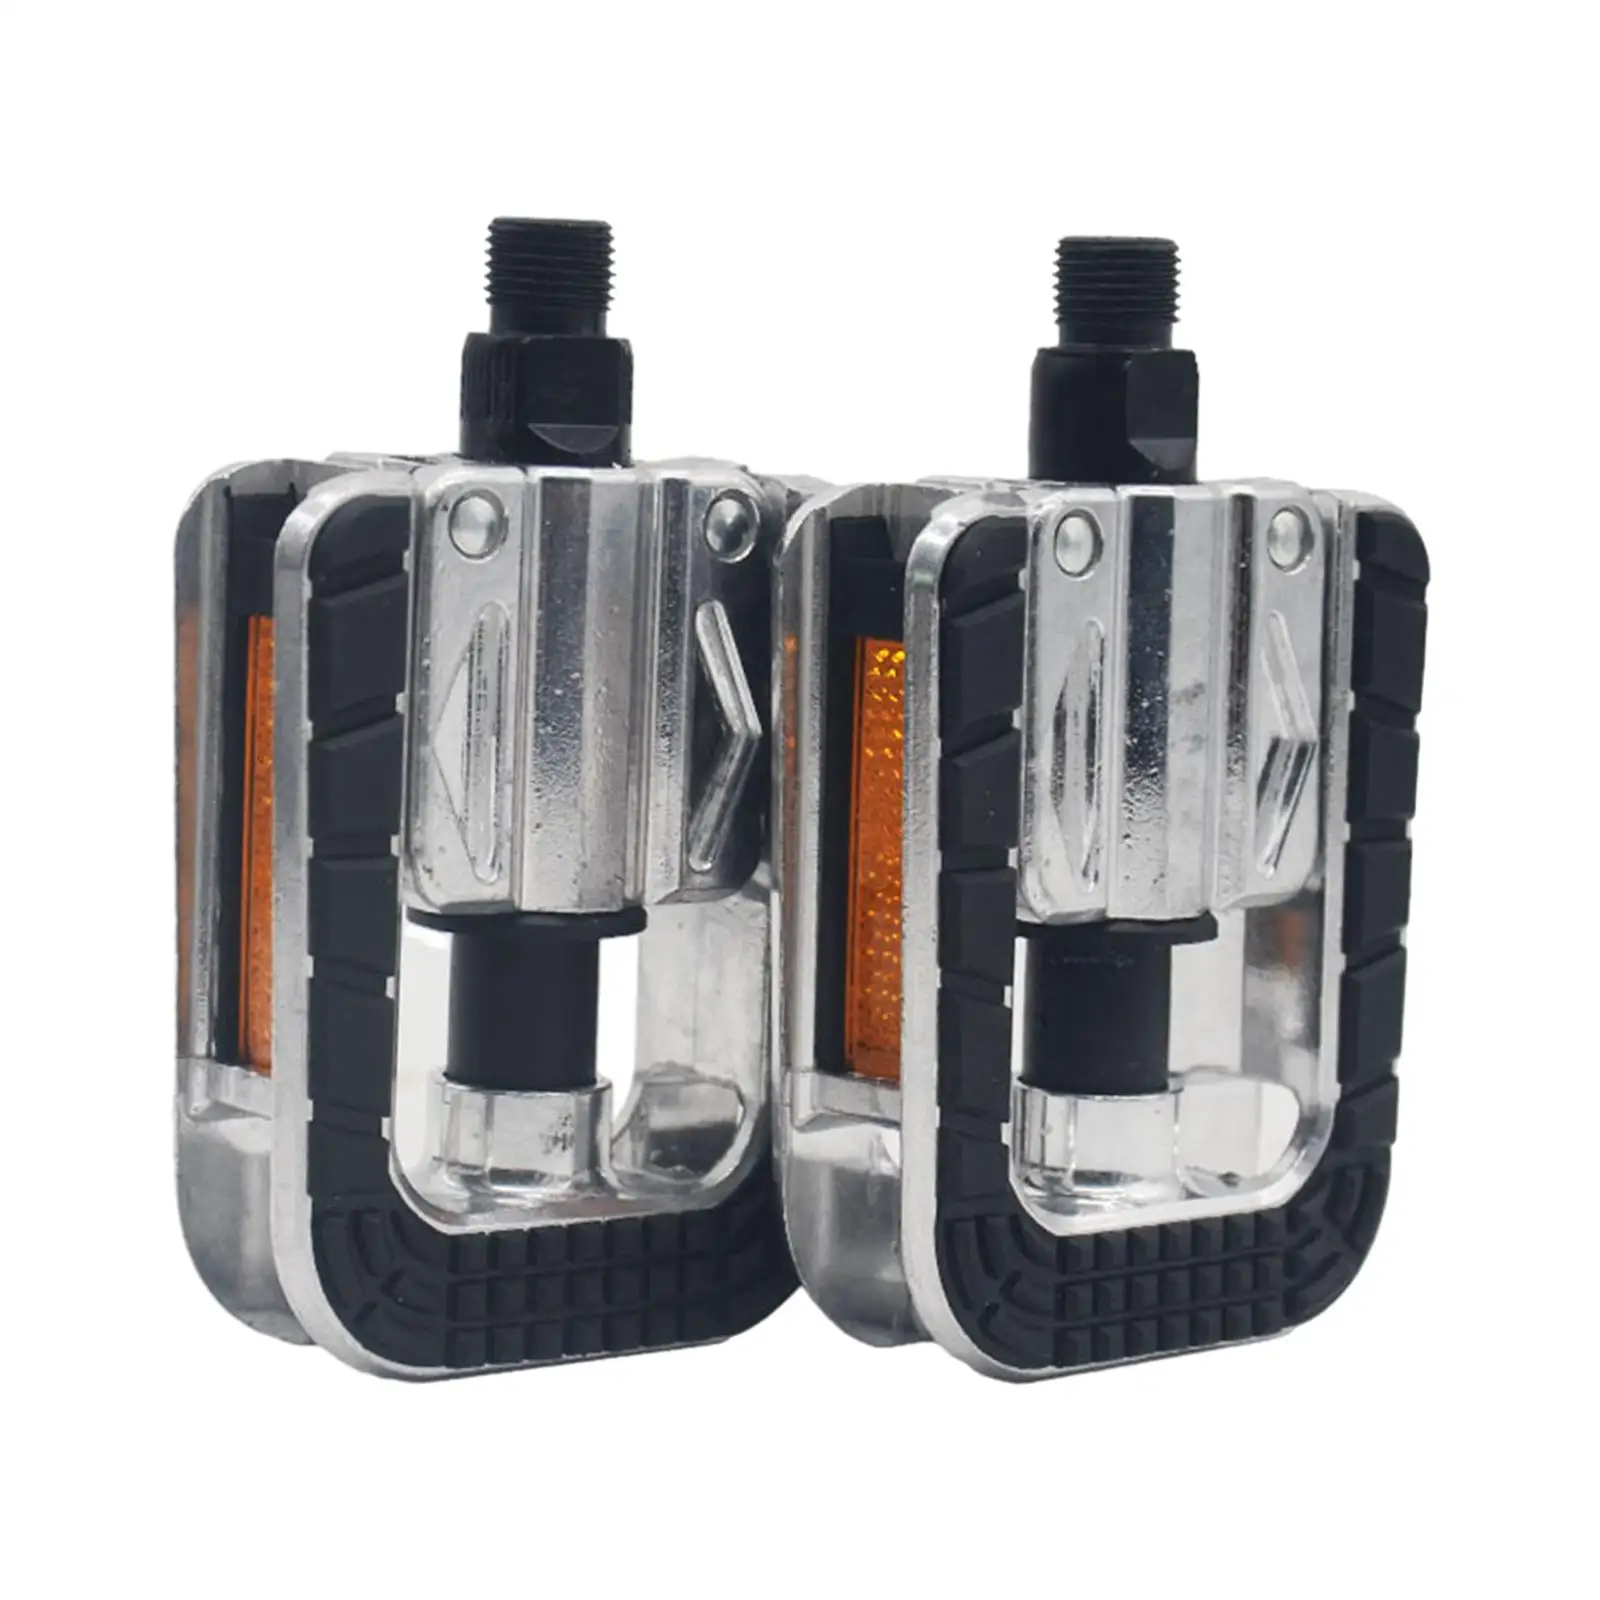 2Pcs Mountain Bike Pedals with Anti Skid Nails Portable Wide Flat Pedals